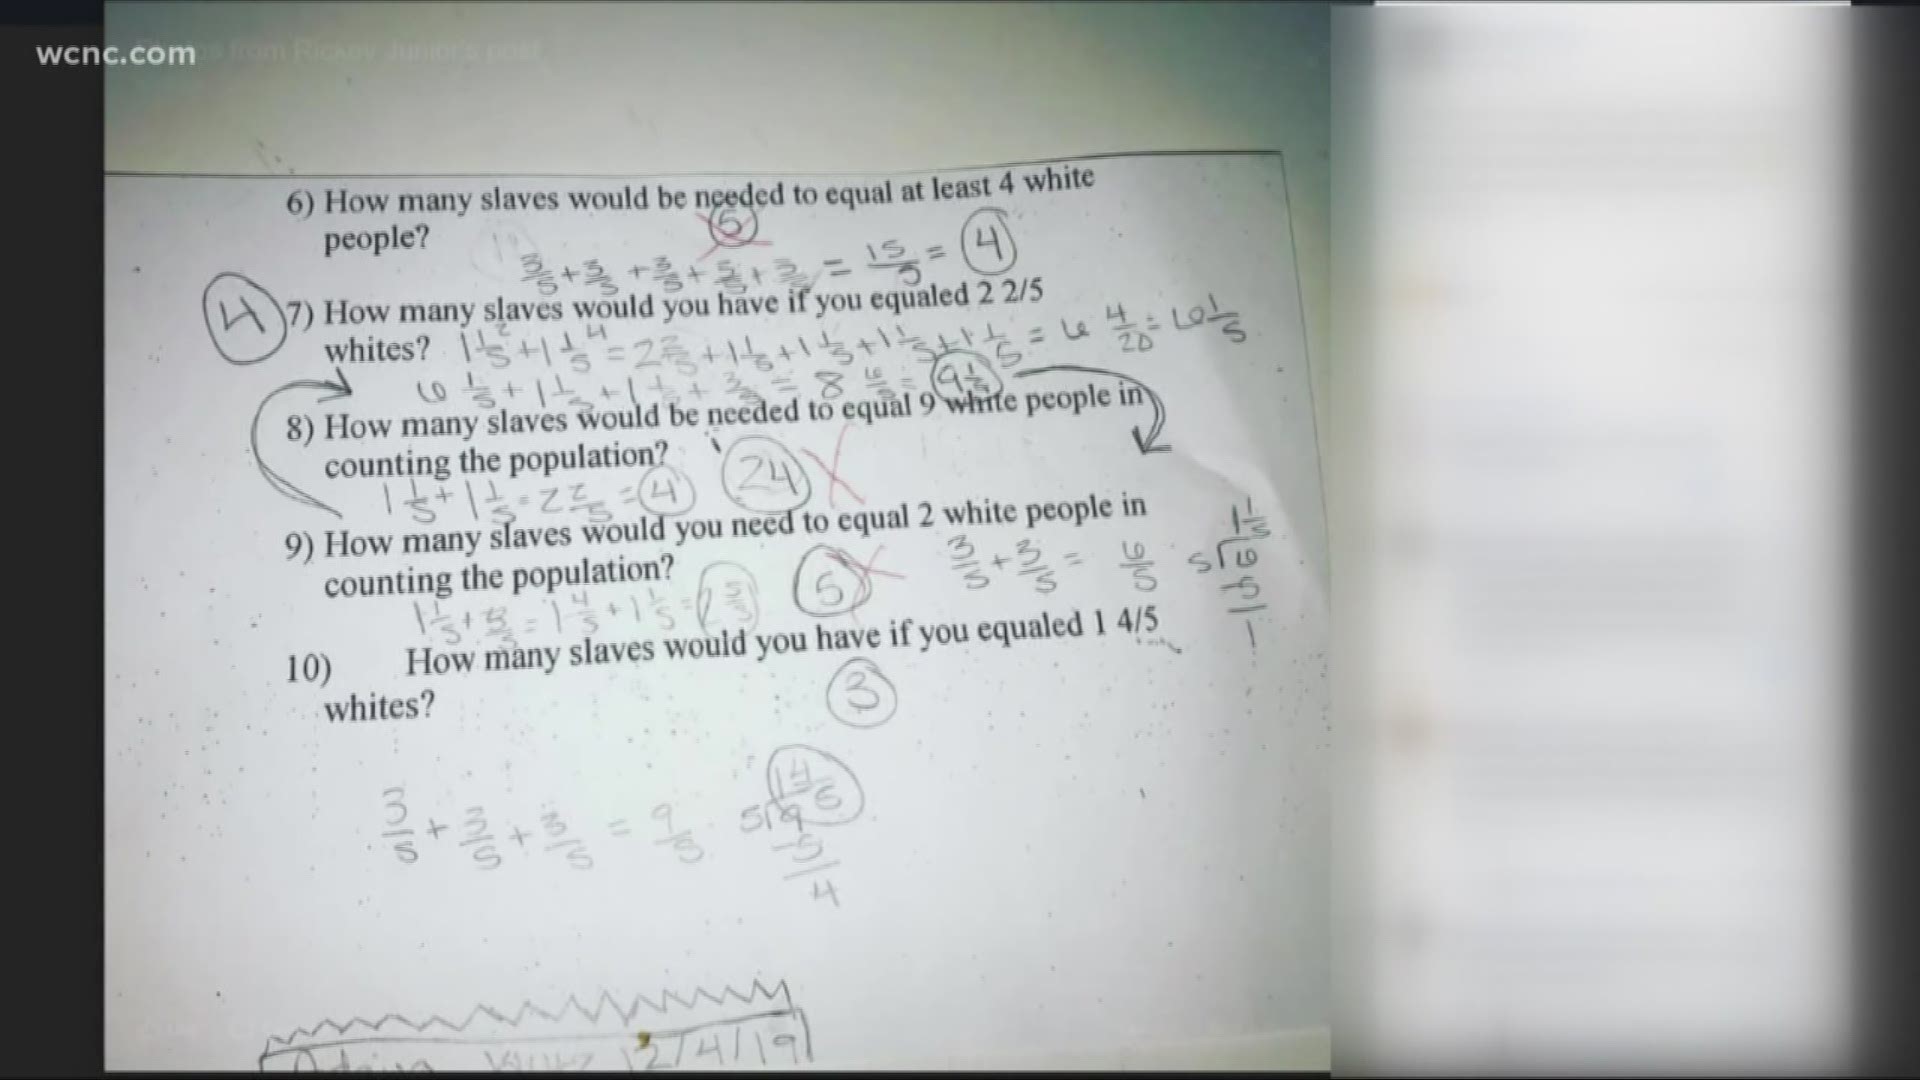 A homework assignment asked students how many slaves equated to one white person.